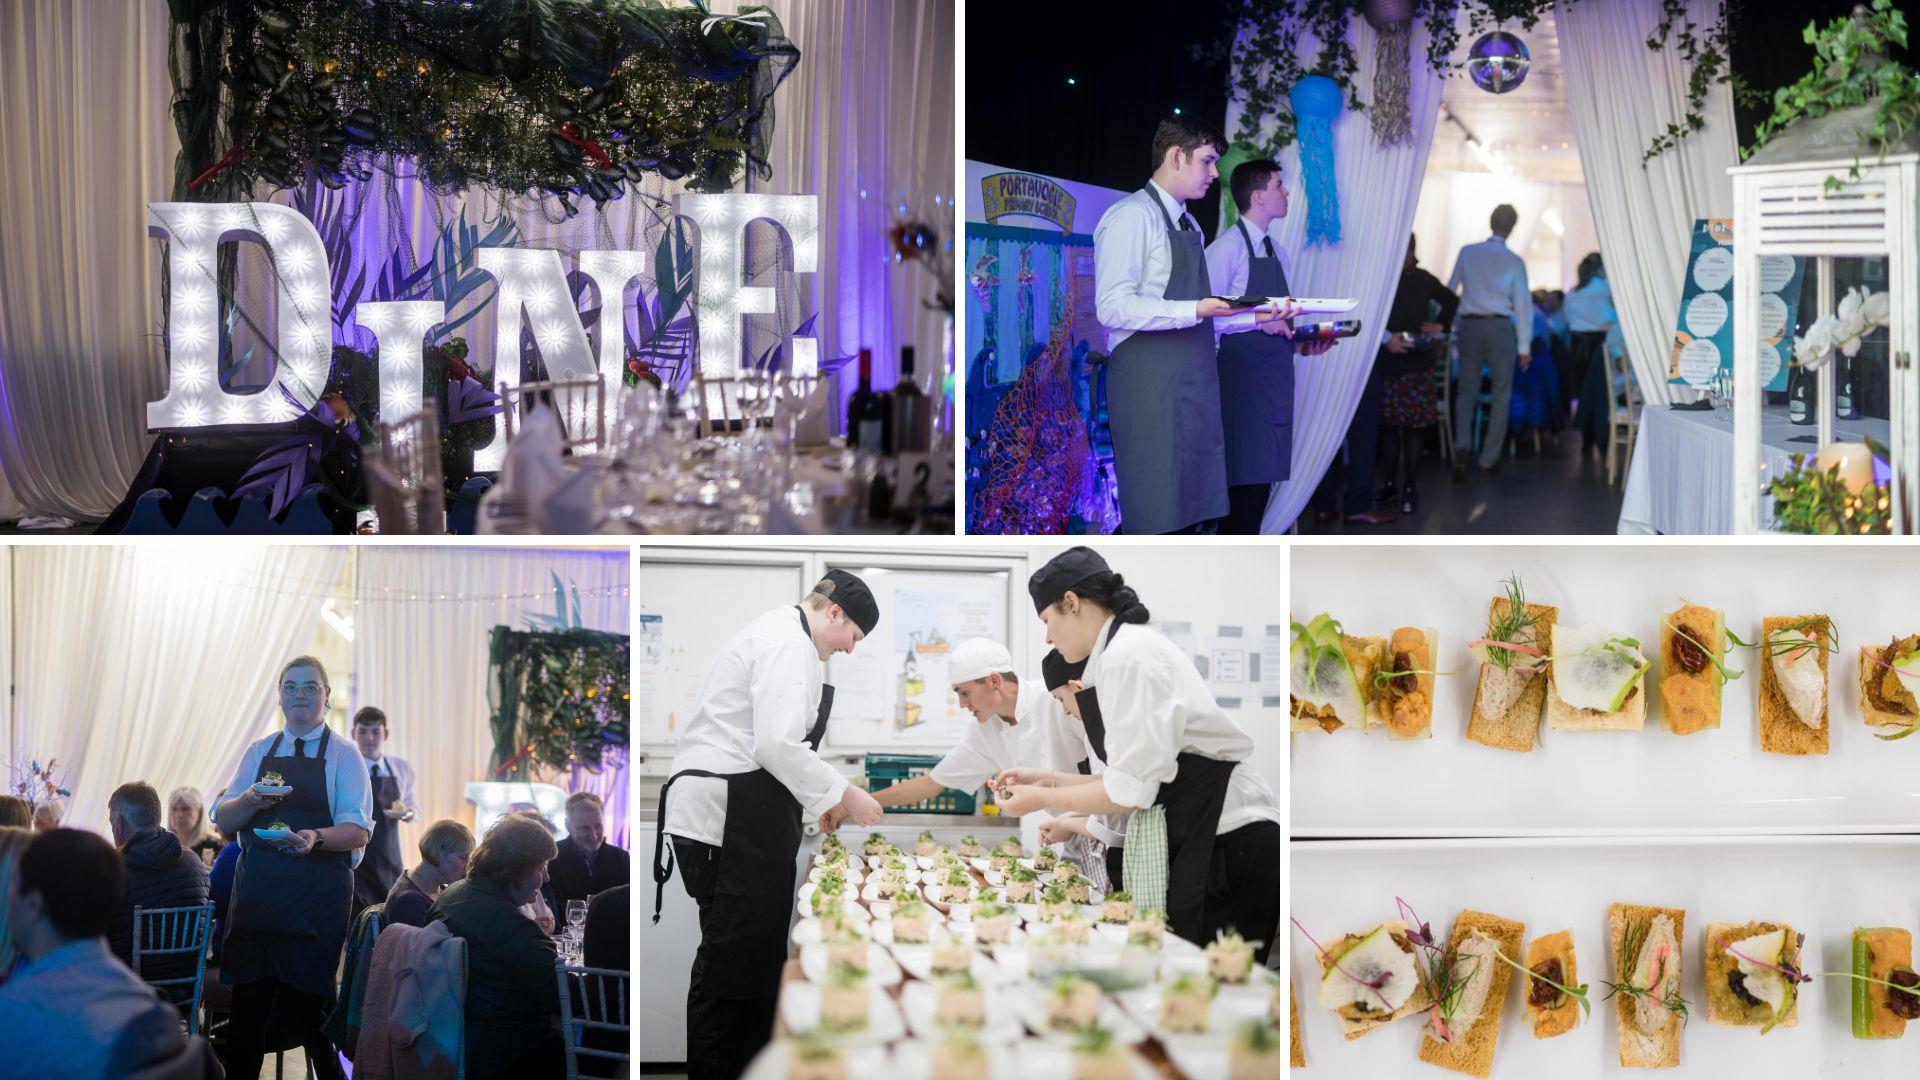 Collage of Dine at Dock images, waiters and waitresses serving food, and food dishes